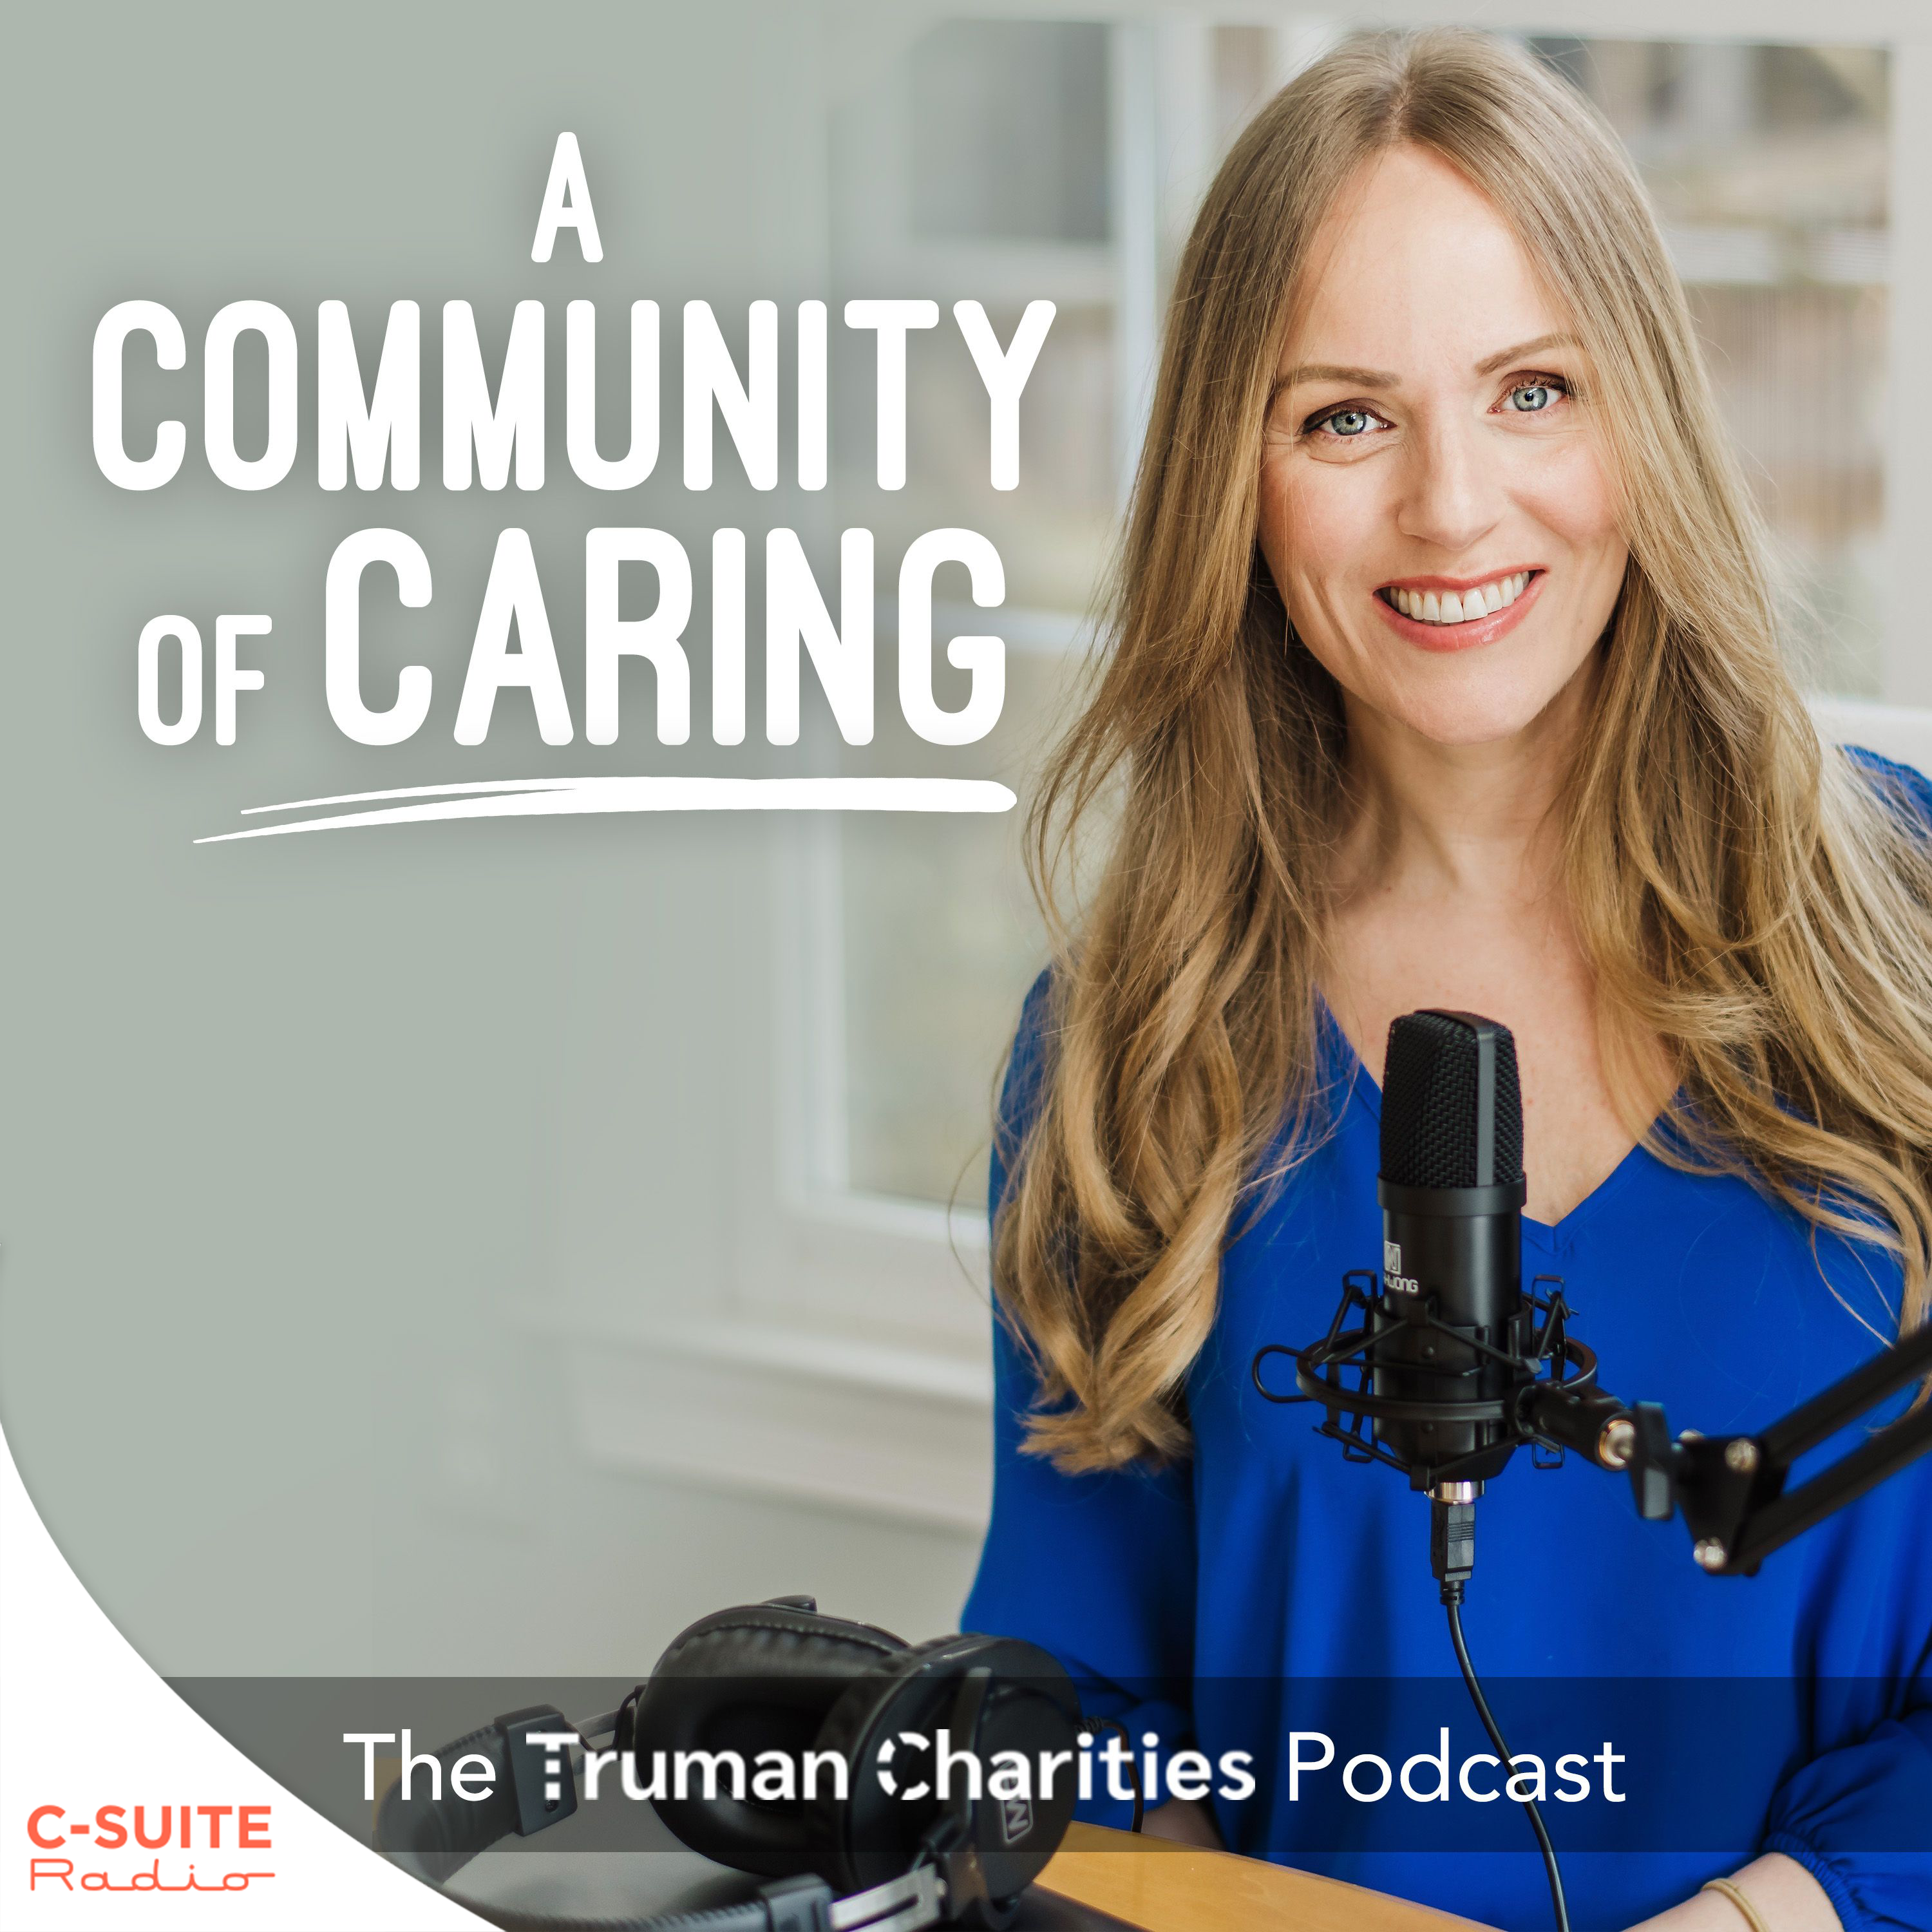 The Truman Charities Podcast: A Community of Caring